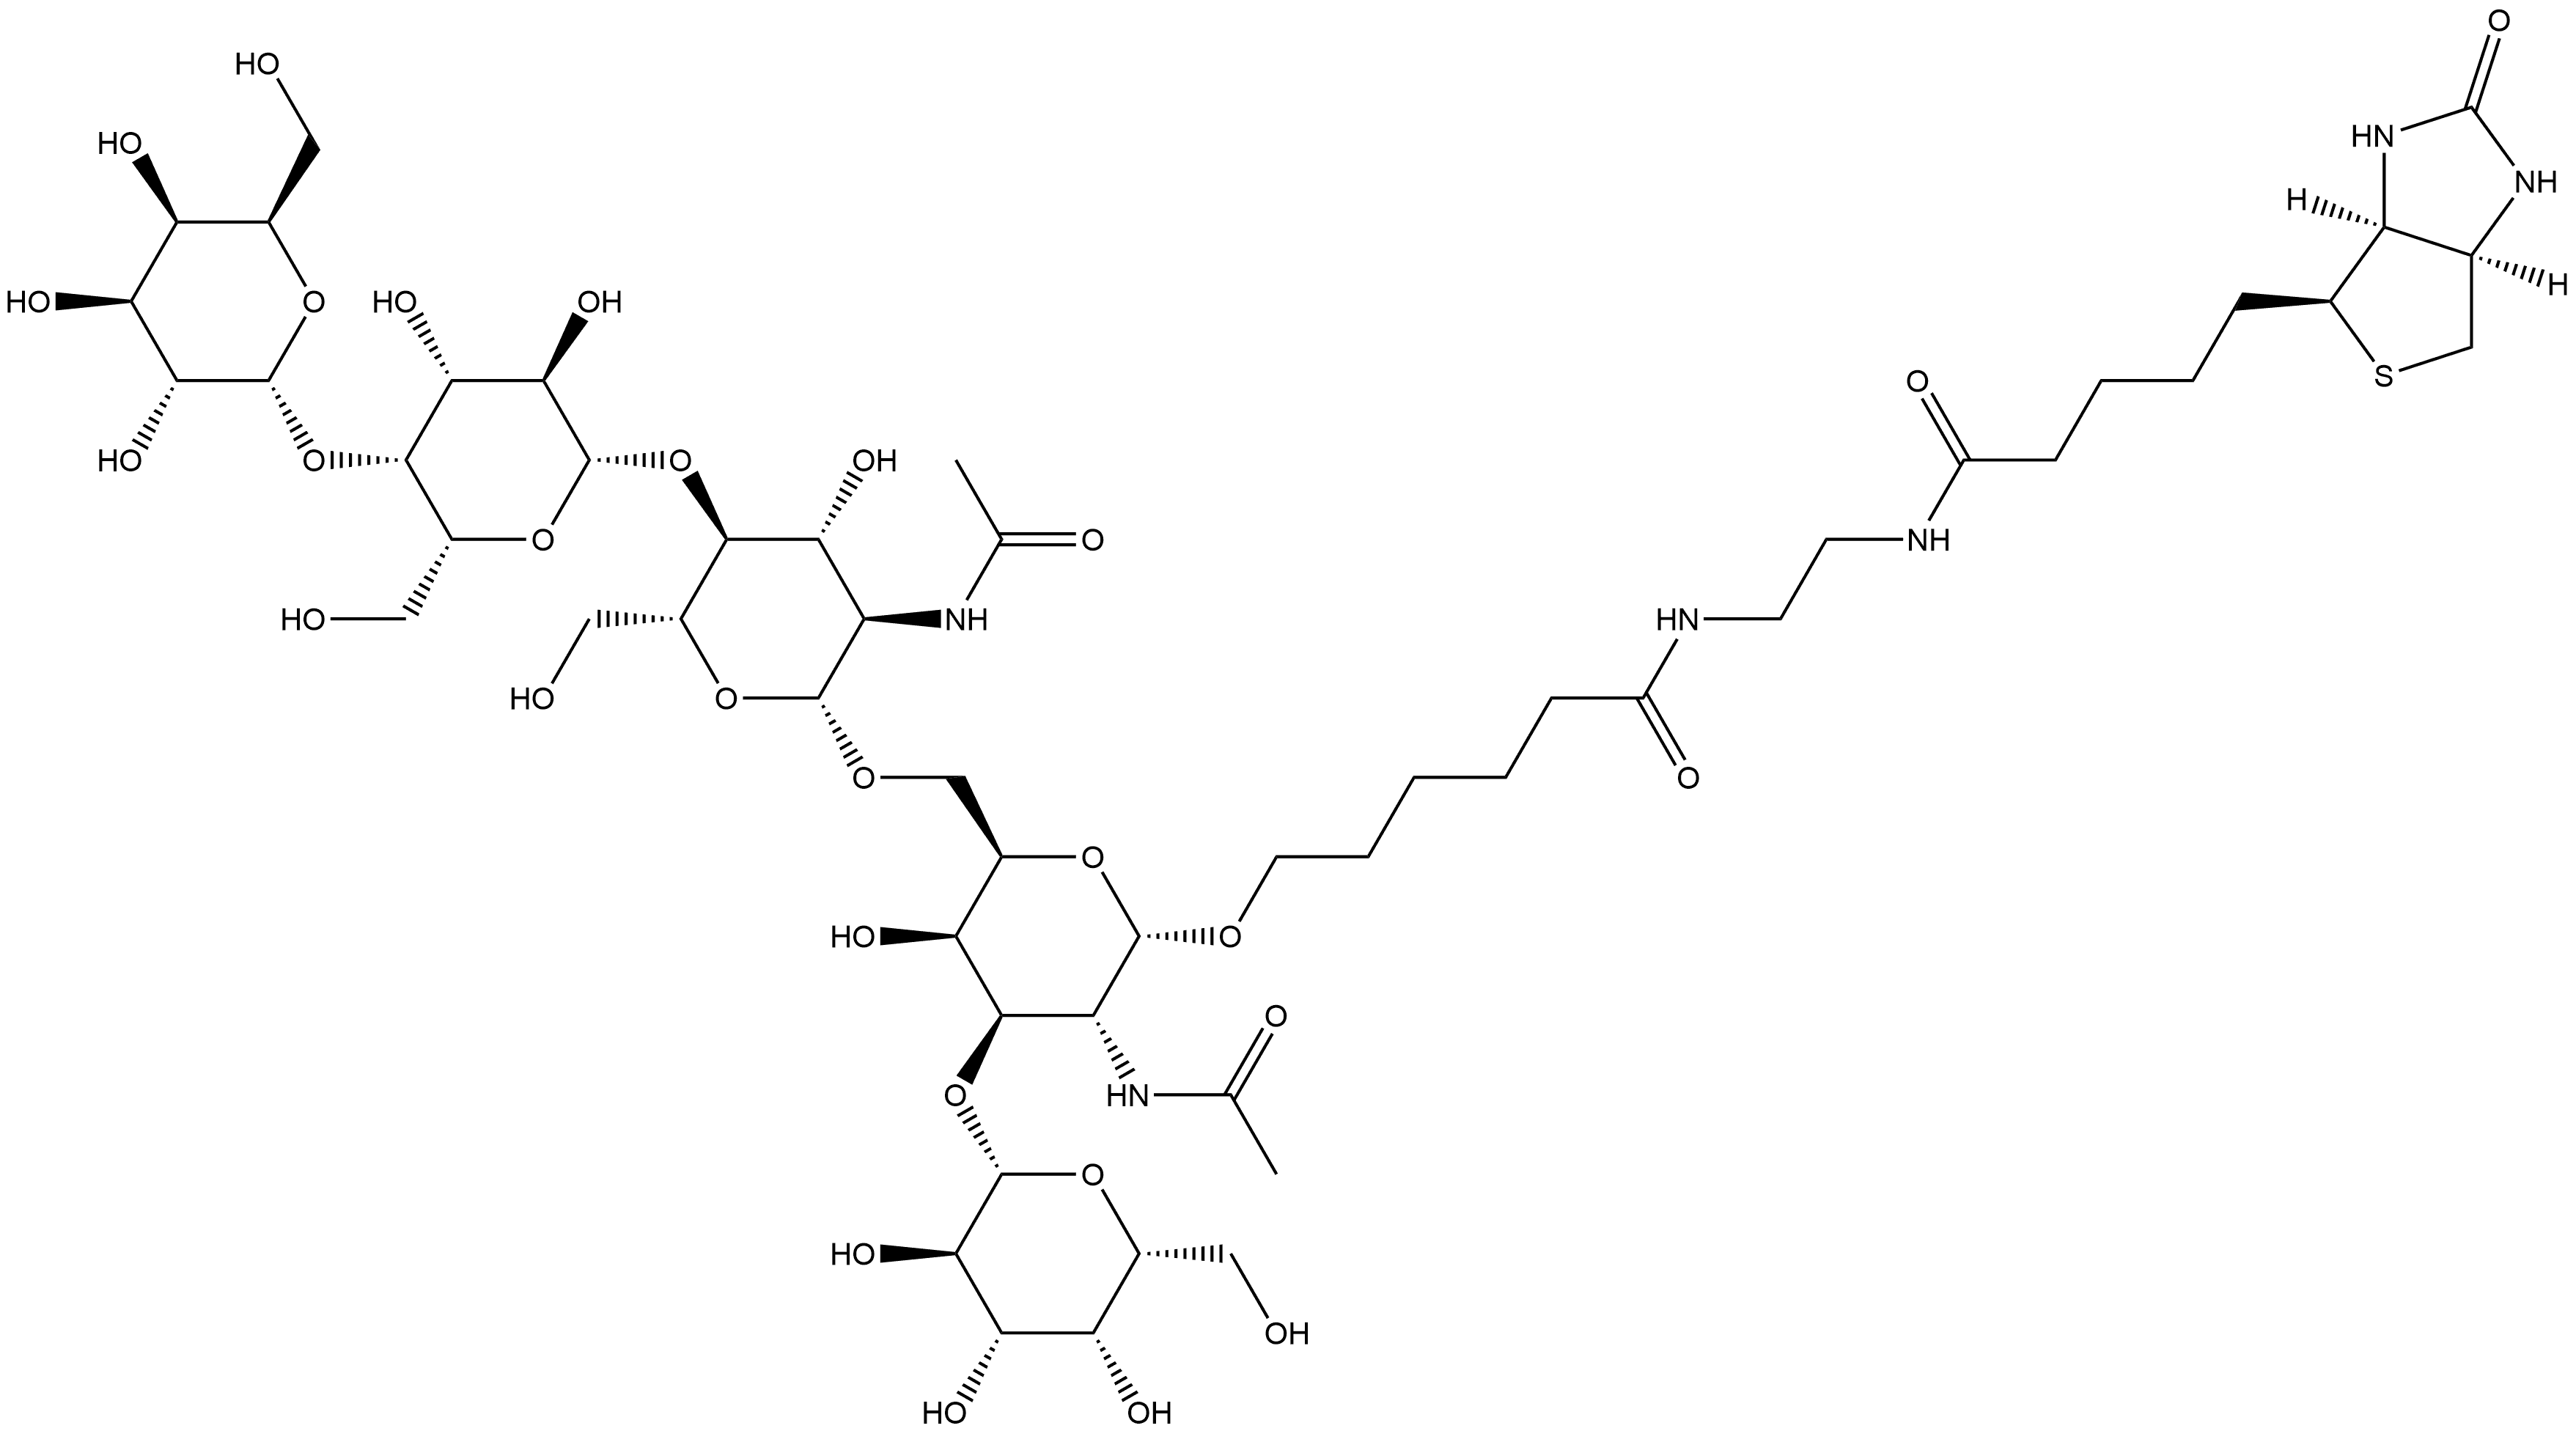 (3aS,4S,6aR)-N-[2-[[6-[[O-α-D-Galactopyranosyl-(1→4)-O-β-D-galactopyranosyl-(1→4)-O-2-(acetylamino)-2-deoxy-β-D-glucopyranosyl-(1→6)-O-[β-D-galactopyranosyl-(1→3)]-2-(acetylamino)-2-deoxy-α-D-galactopyranosyl]oxy]-1-oxohexyl]amino]ethyl]hexahydro-2-oxo-1H-thieno[3,4-d]imidazole-4-pentanamide Structure